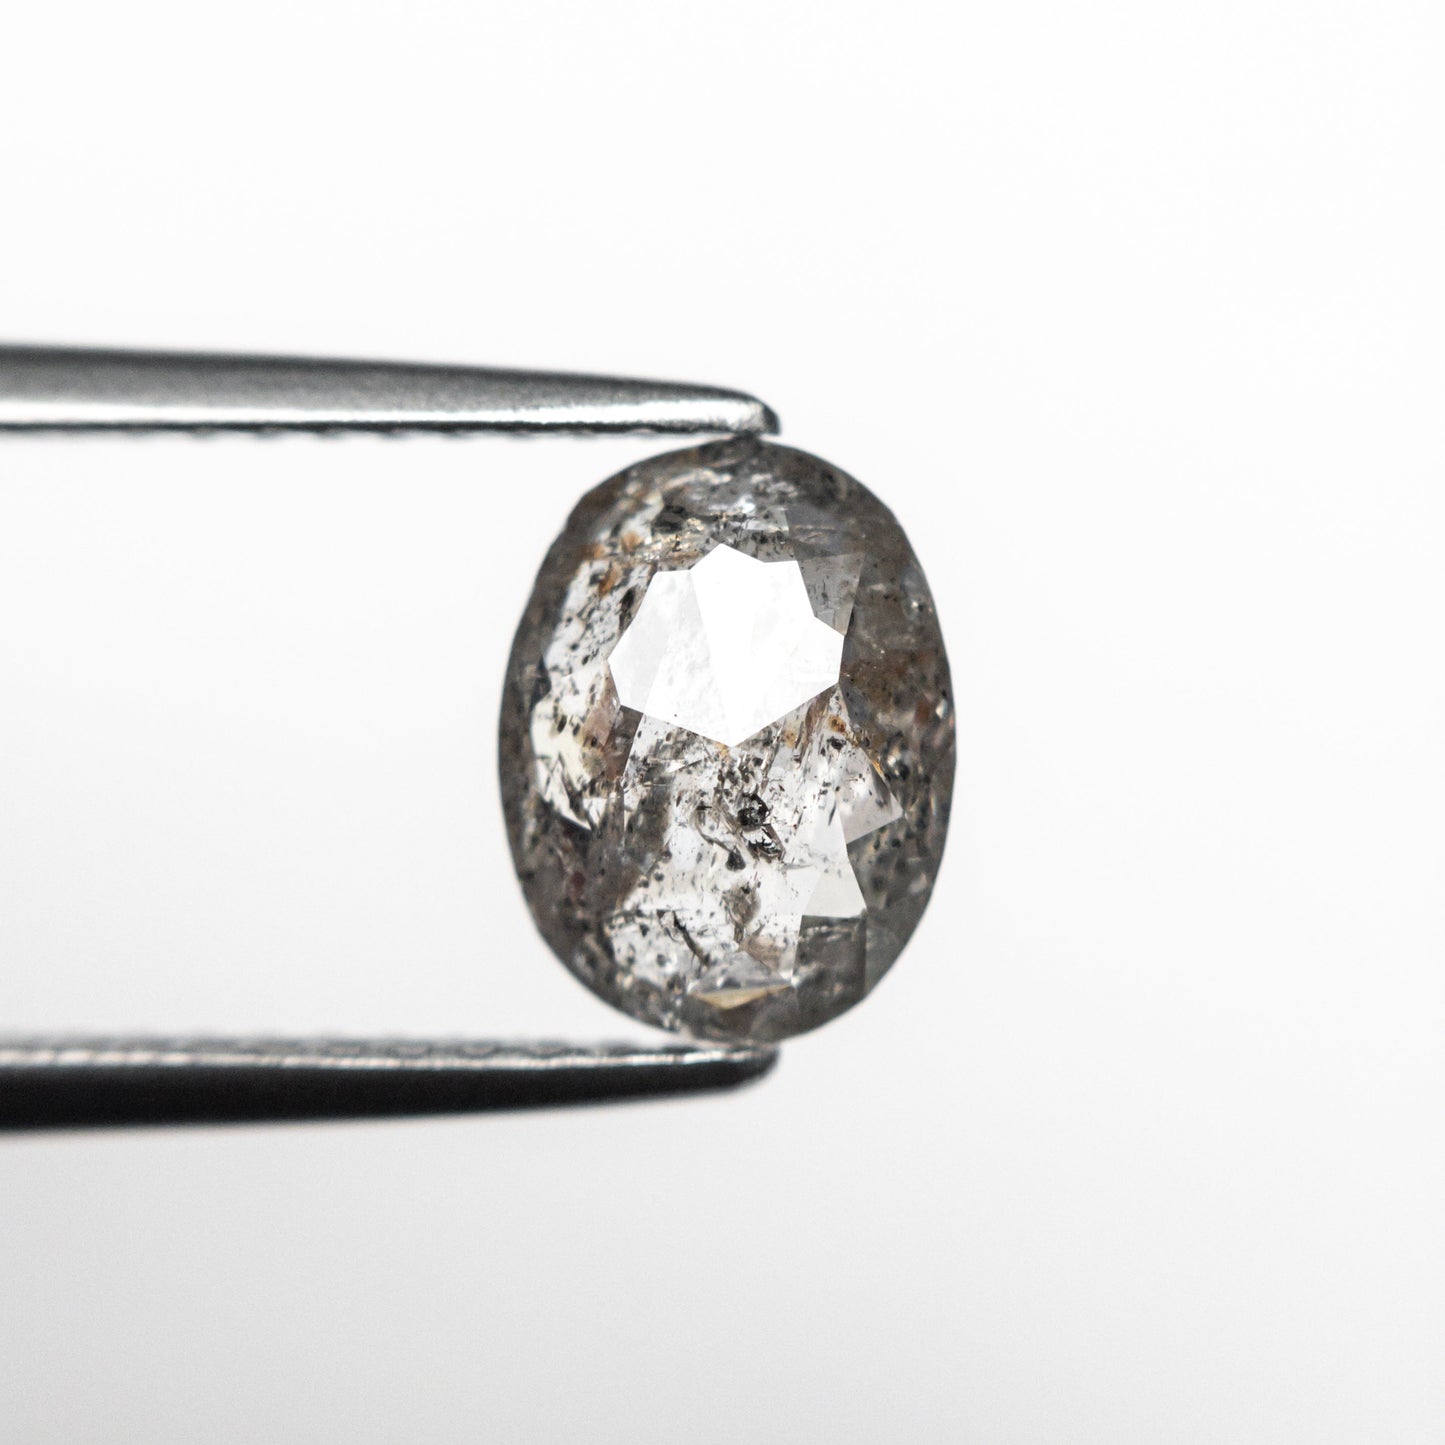 1.11ct 7.91x6.07x2.75mm Oval Double Cut 18524-11